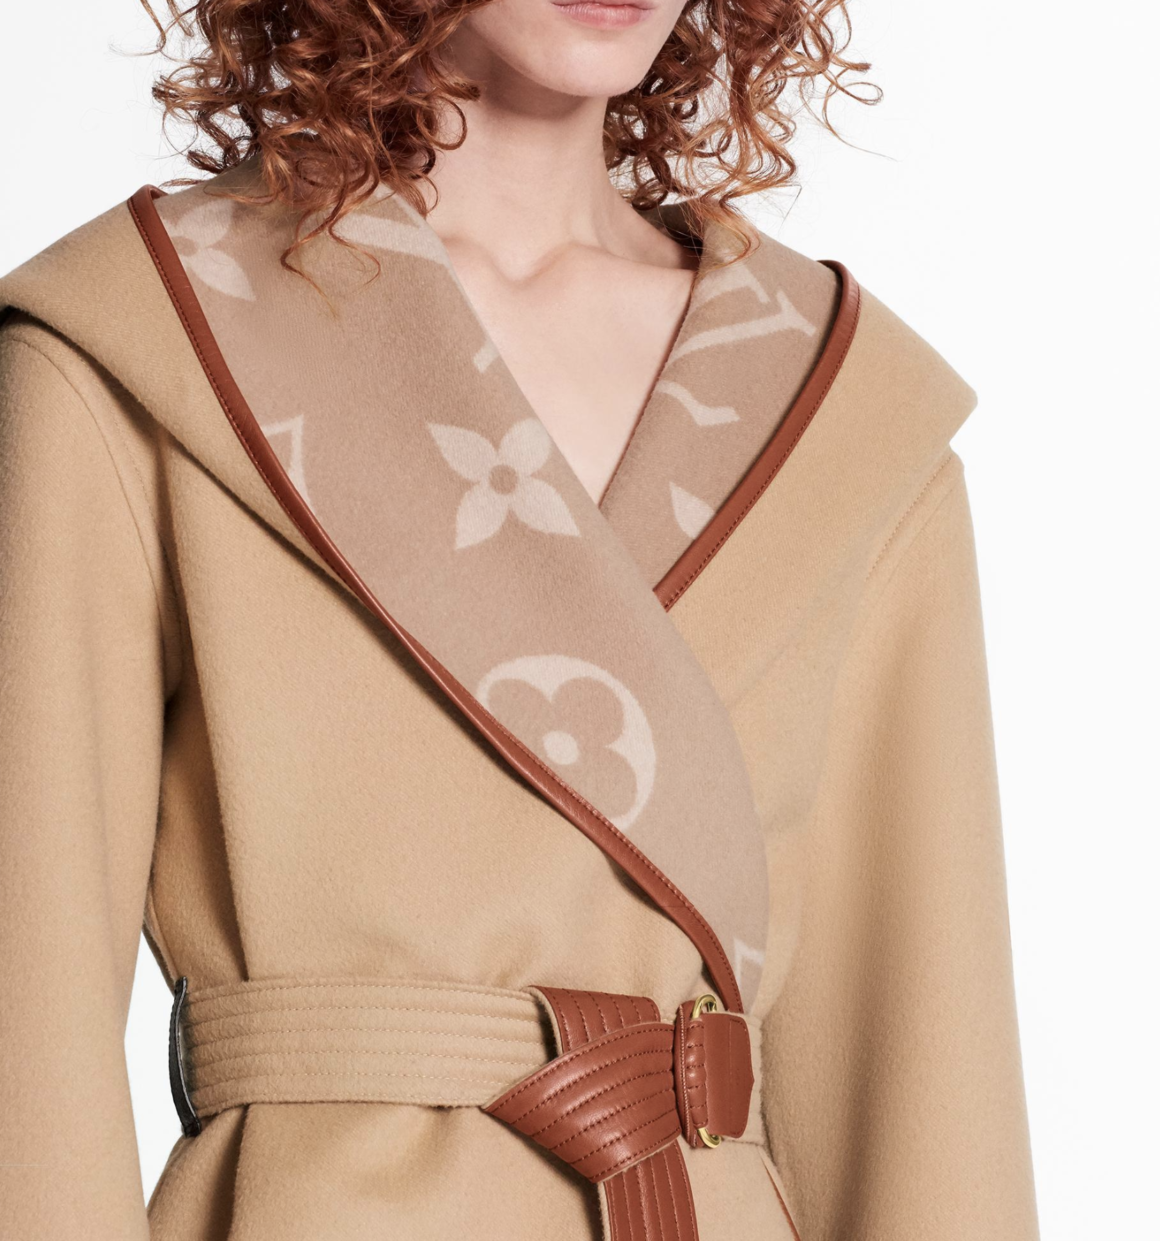 Bomb_Product_of_the_day_Louis_Vuitton_tan_wrap_coat_3